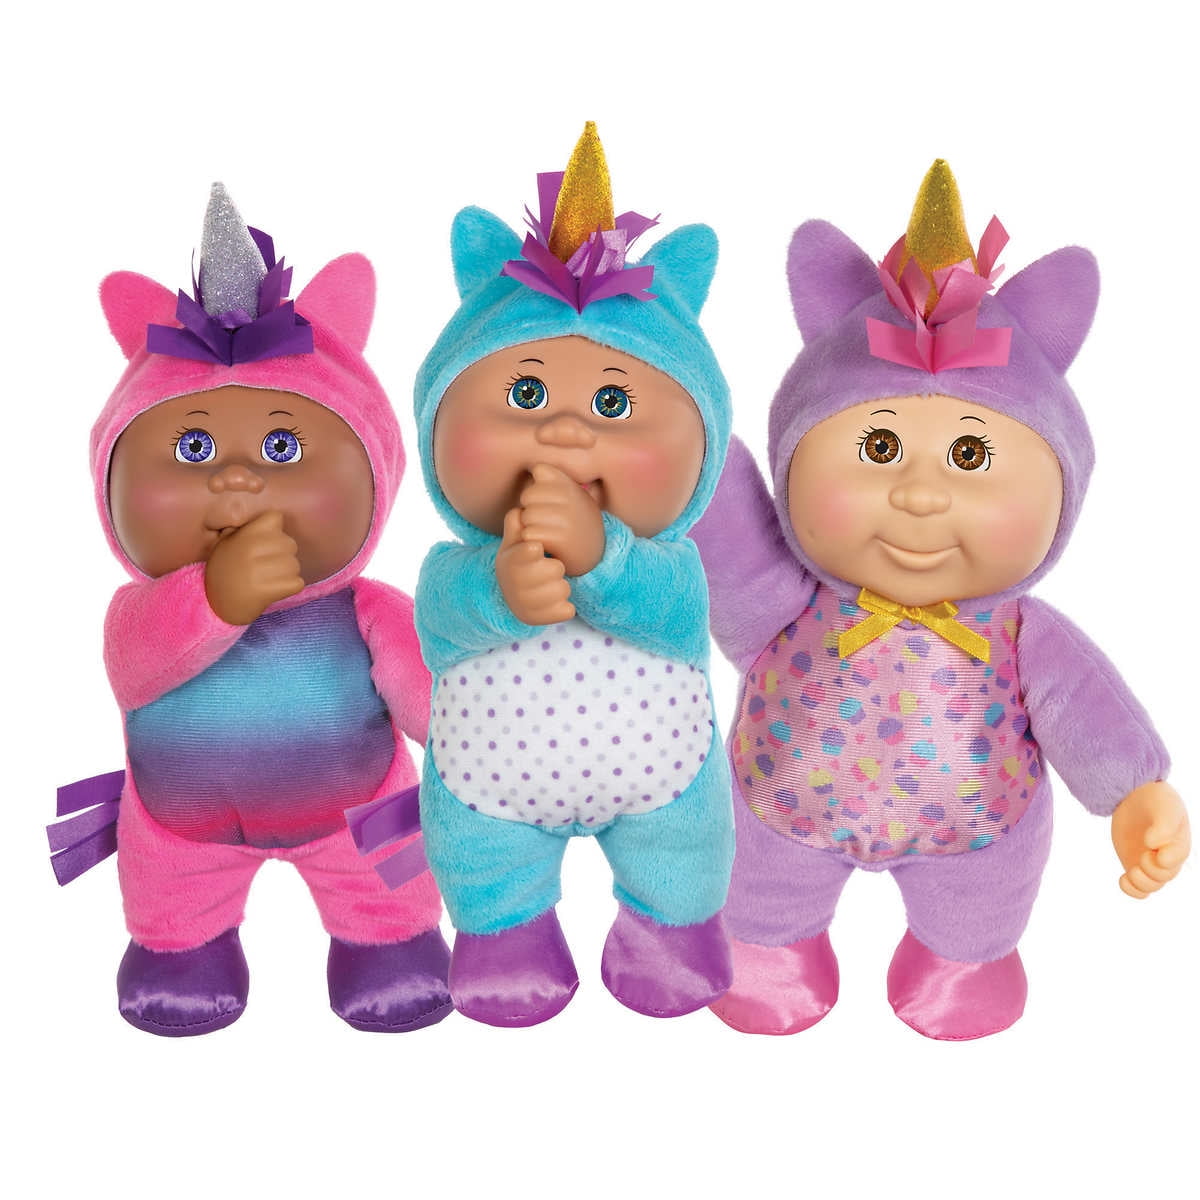 Cabbage Patch Kids 23cm Fantasy Friends Cuties 3-Pack Kids Play Toy Dolls NEW 